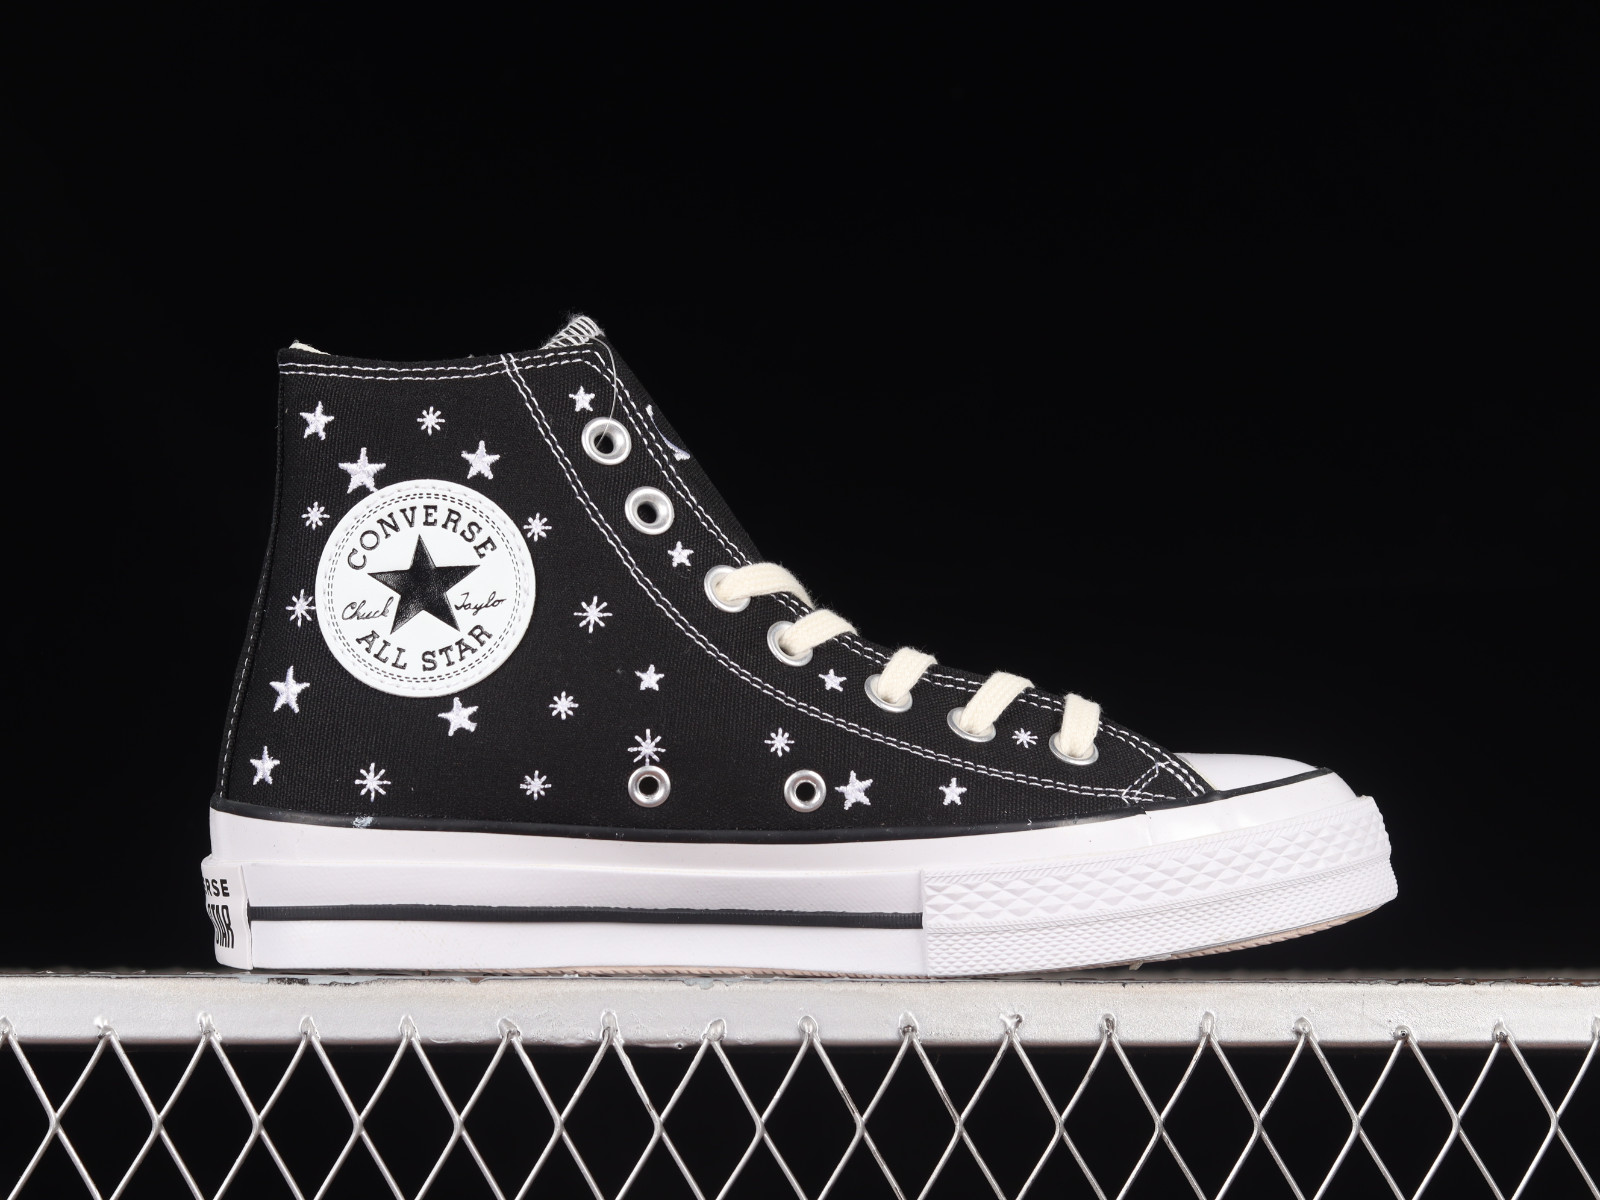 Wissen verraad Oh jee Converse Chuck Taylor All Star High Embroidered Stars Black Egret Vintage  White A03723C - GmarShops